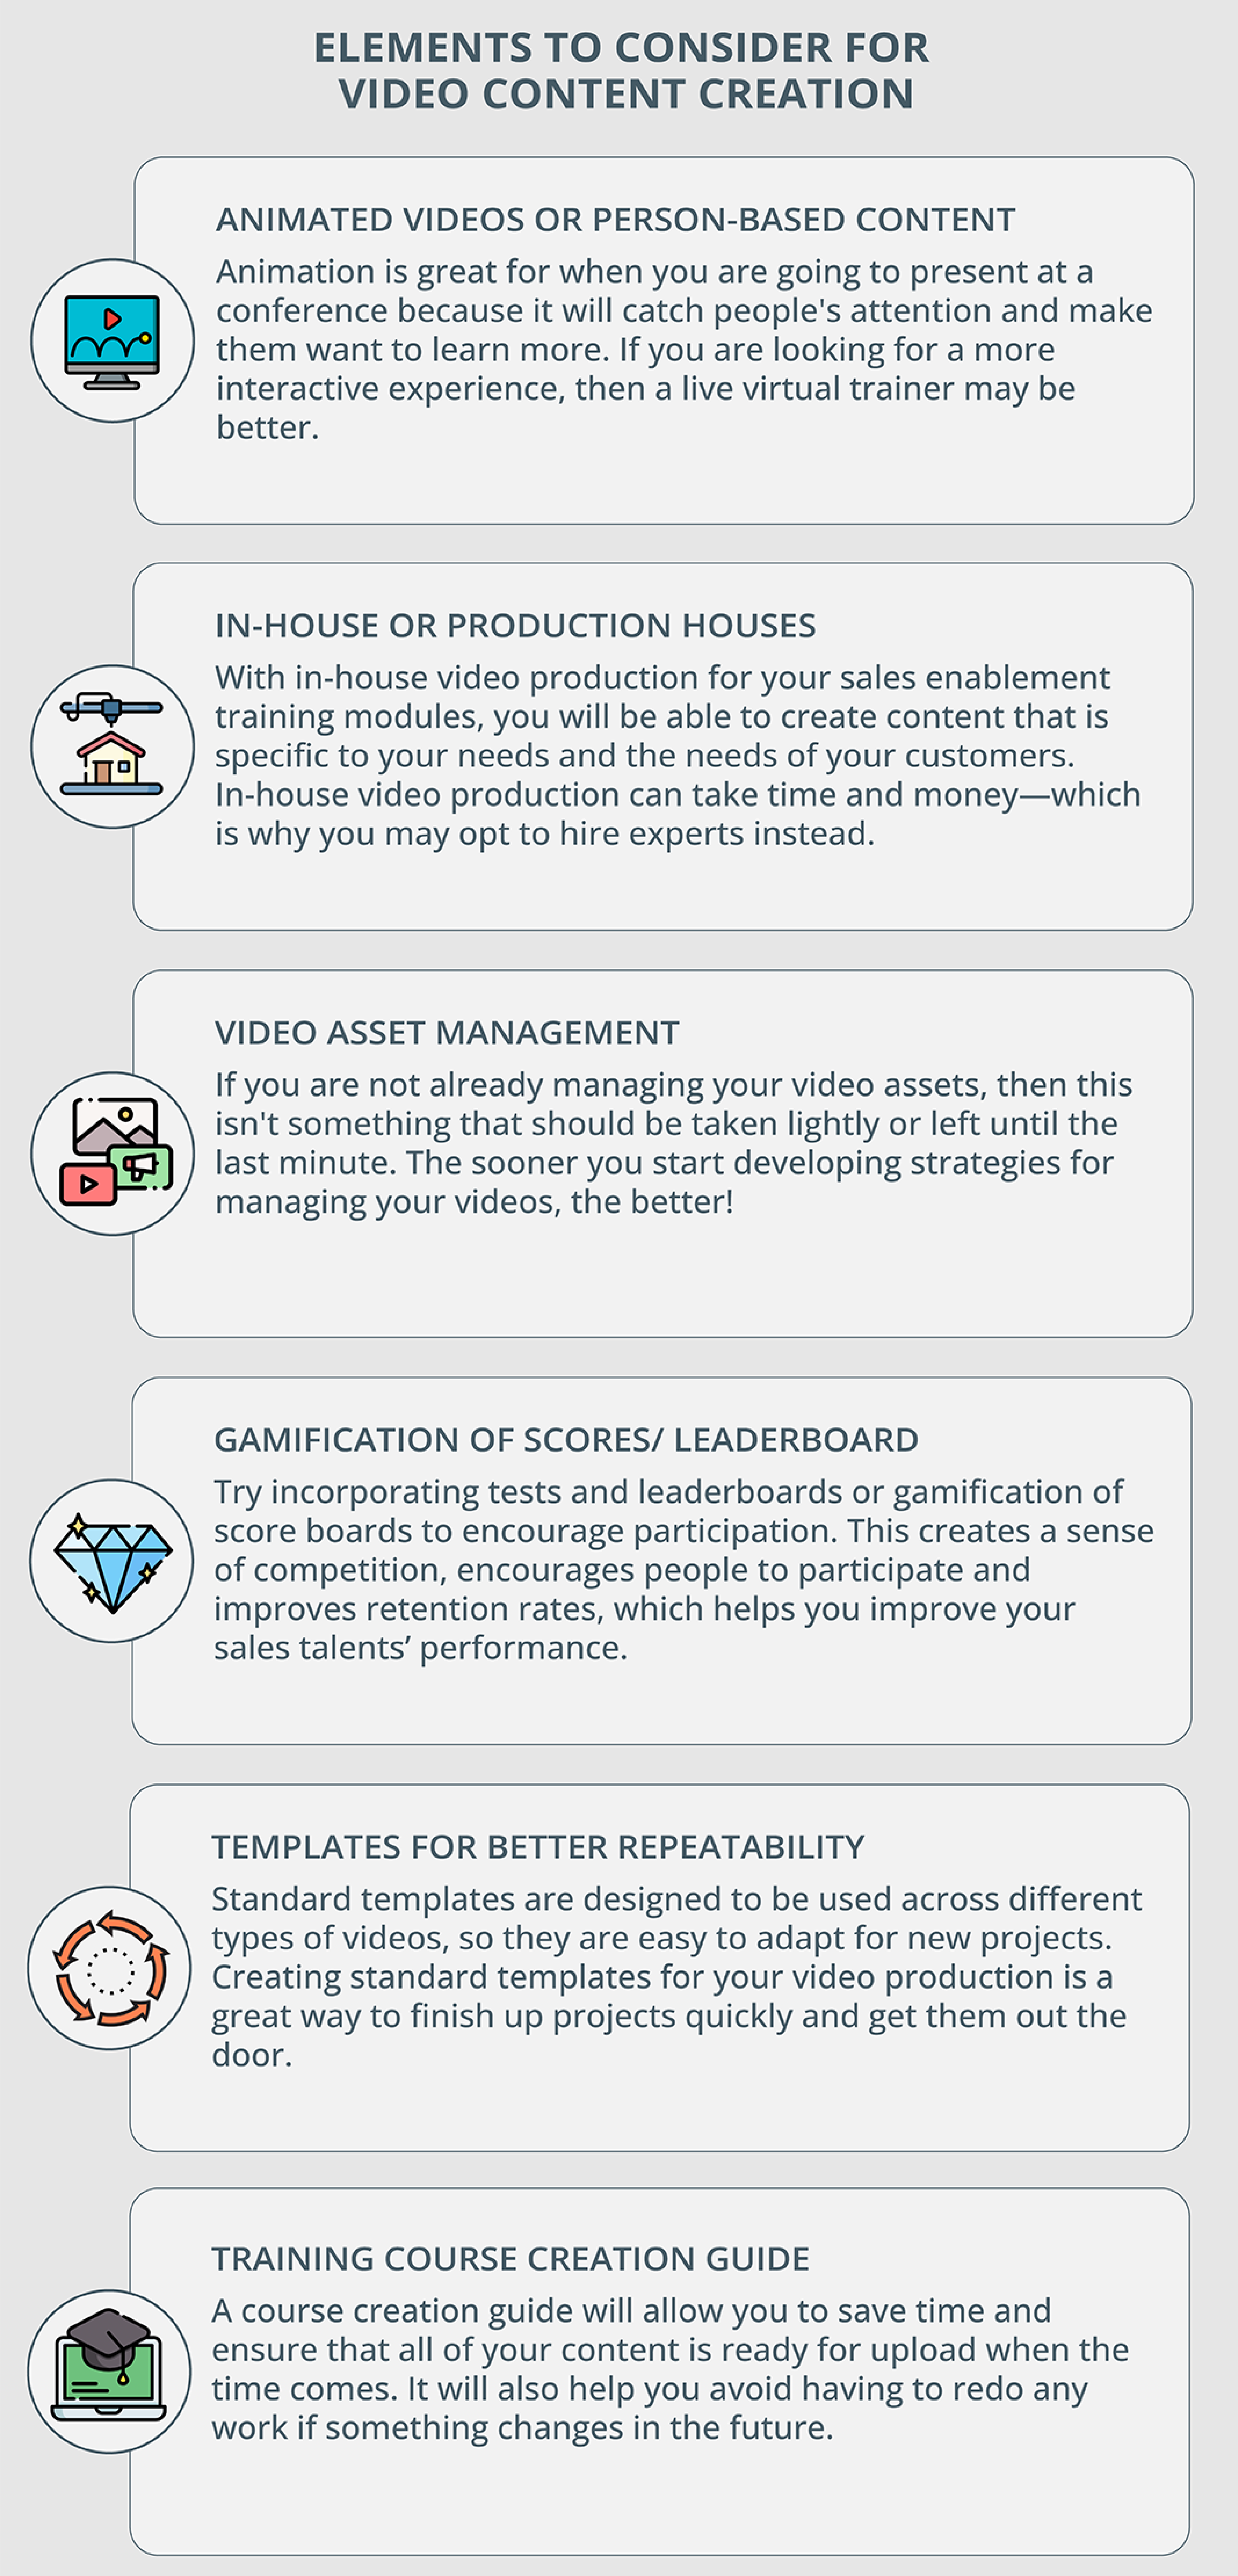 Elements to consider for video content creation